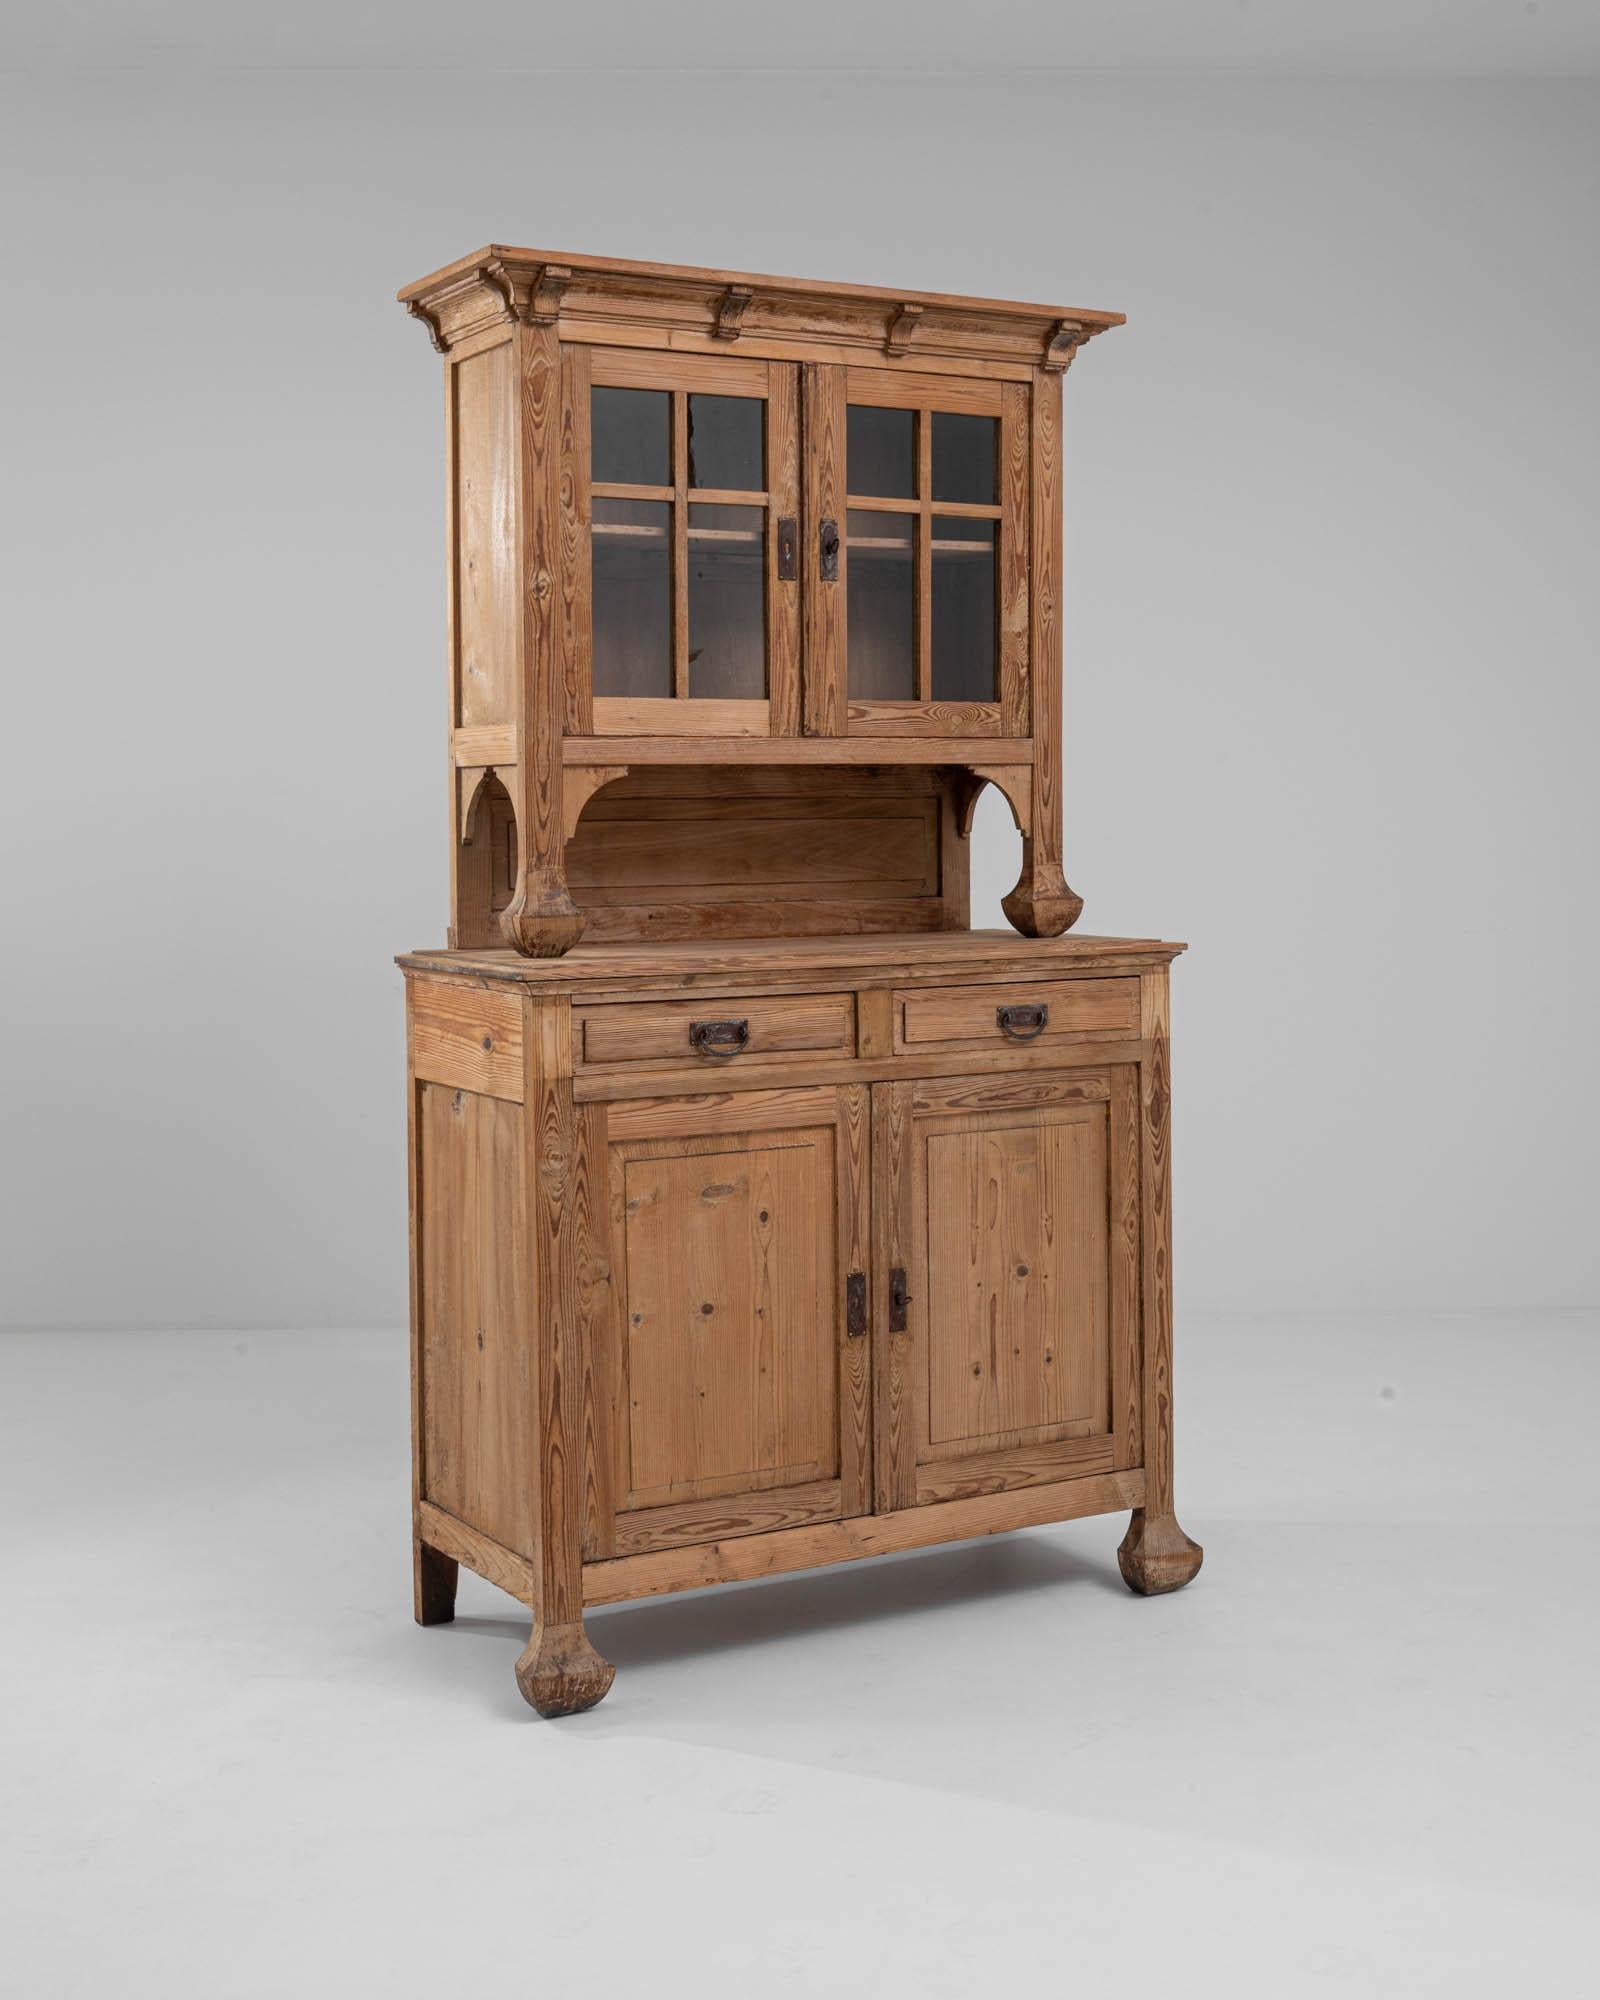 A wooden vitrine made in 1920s France. The vitrine is composed atop a lower cabinet with two doors and two drawers, and the display case resting above with a charming glazed frame. The bulbous, tapered feet along with carved corbels elevate the warm